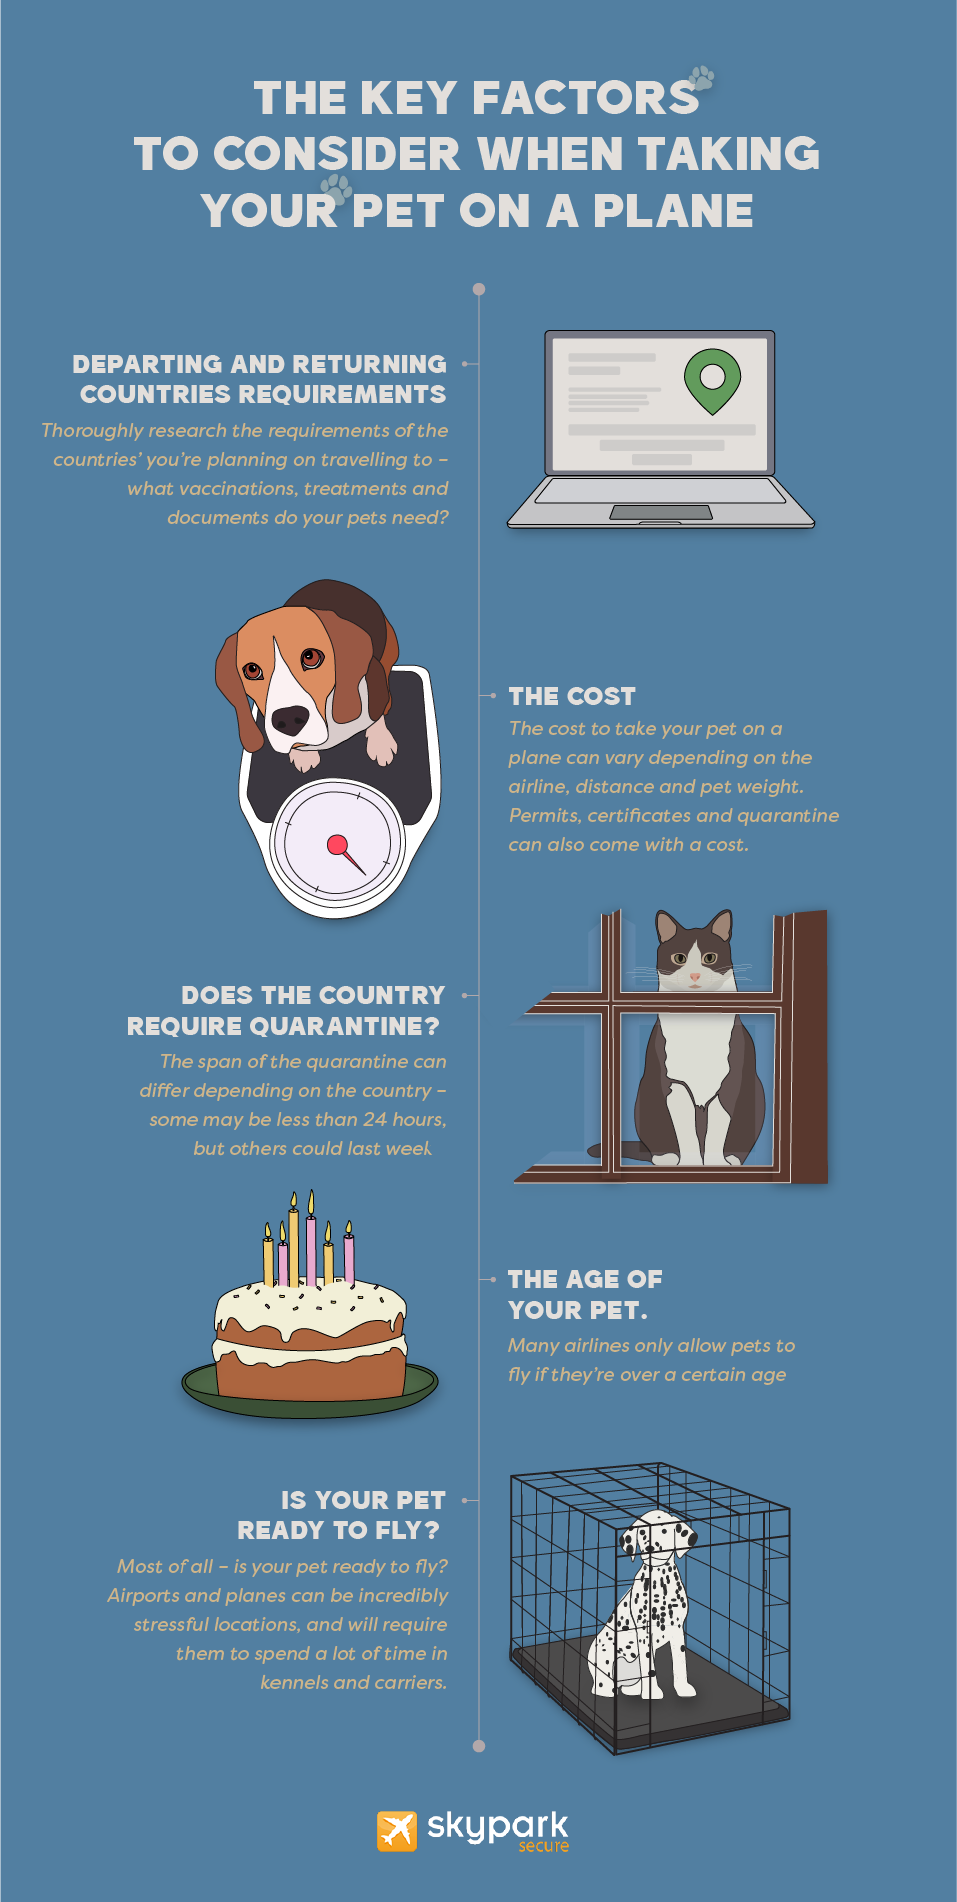 Key factors to consider when taking a pet on a plane